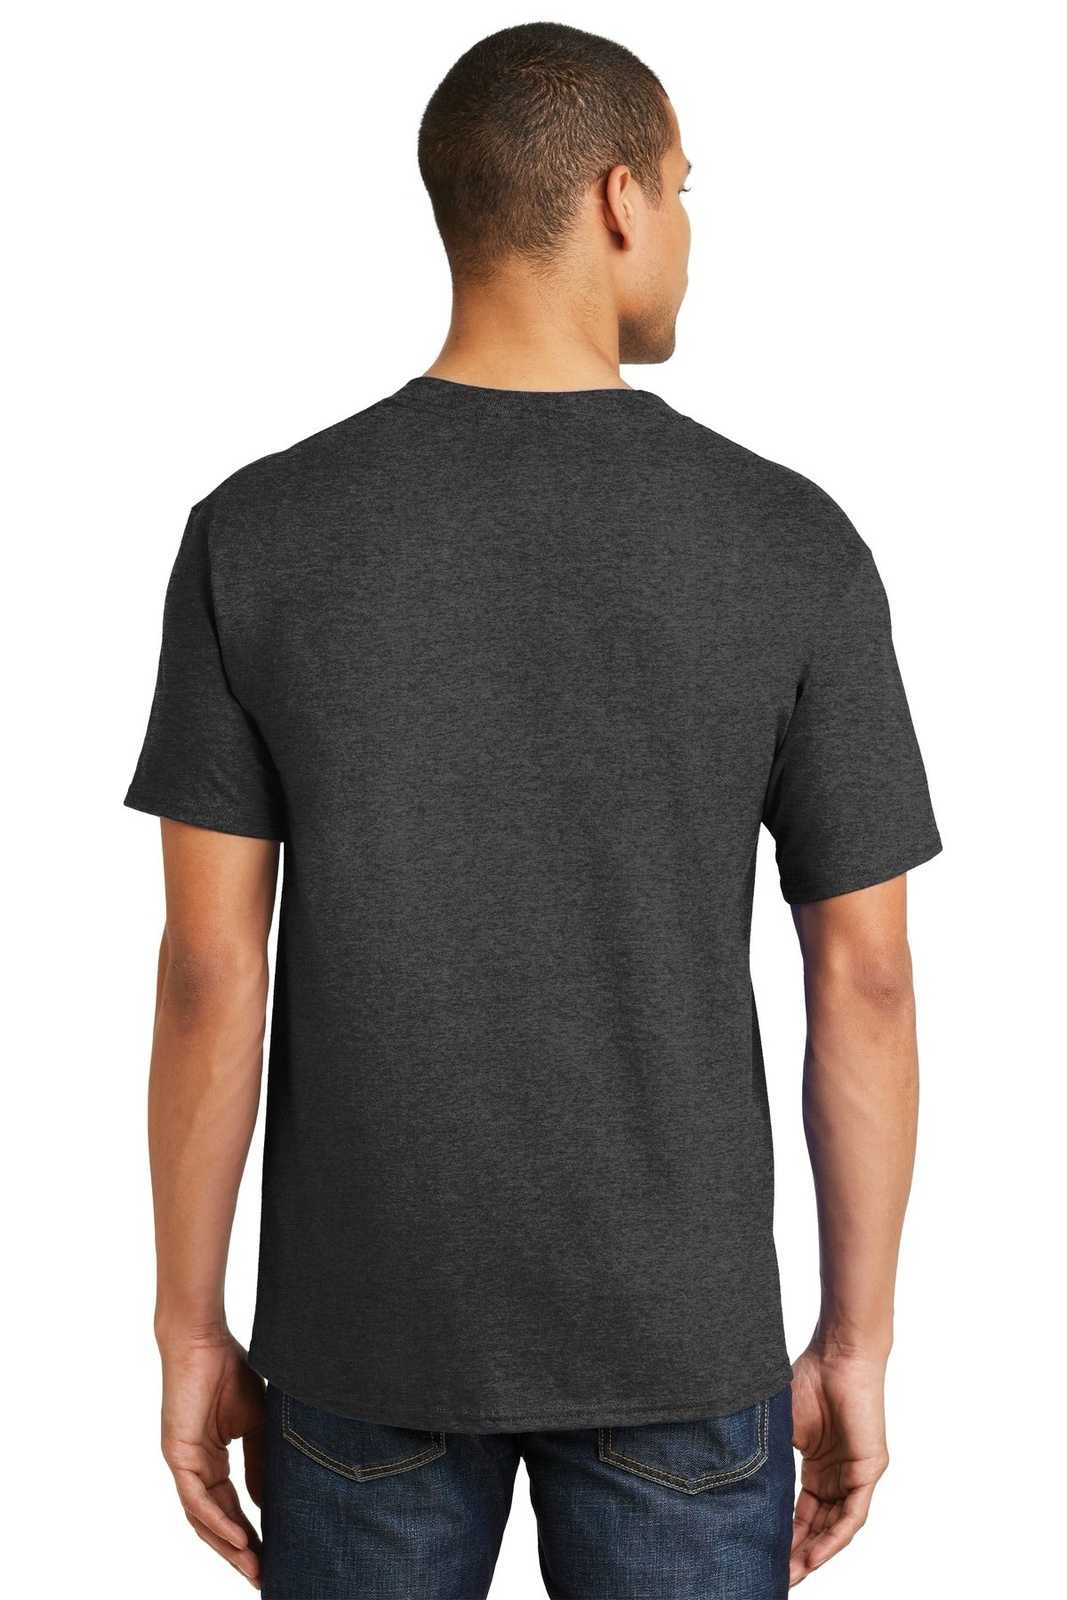 Hanes 5180 Beefy-T 100% Cotton T-Shirt - Charcoal Heather - HIT a Double